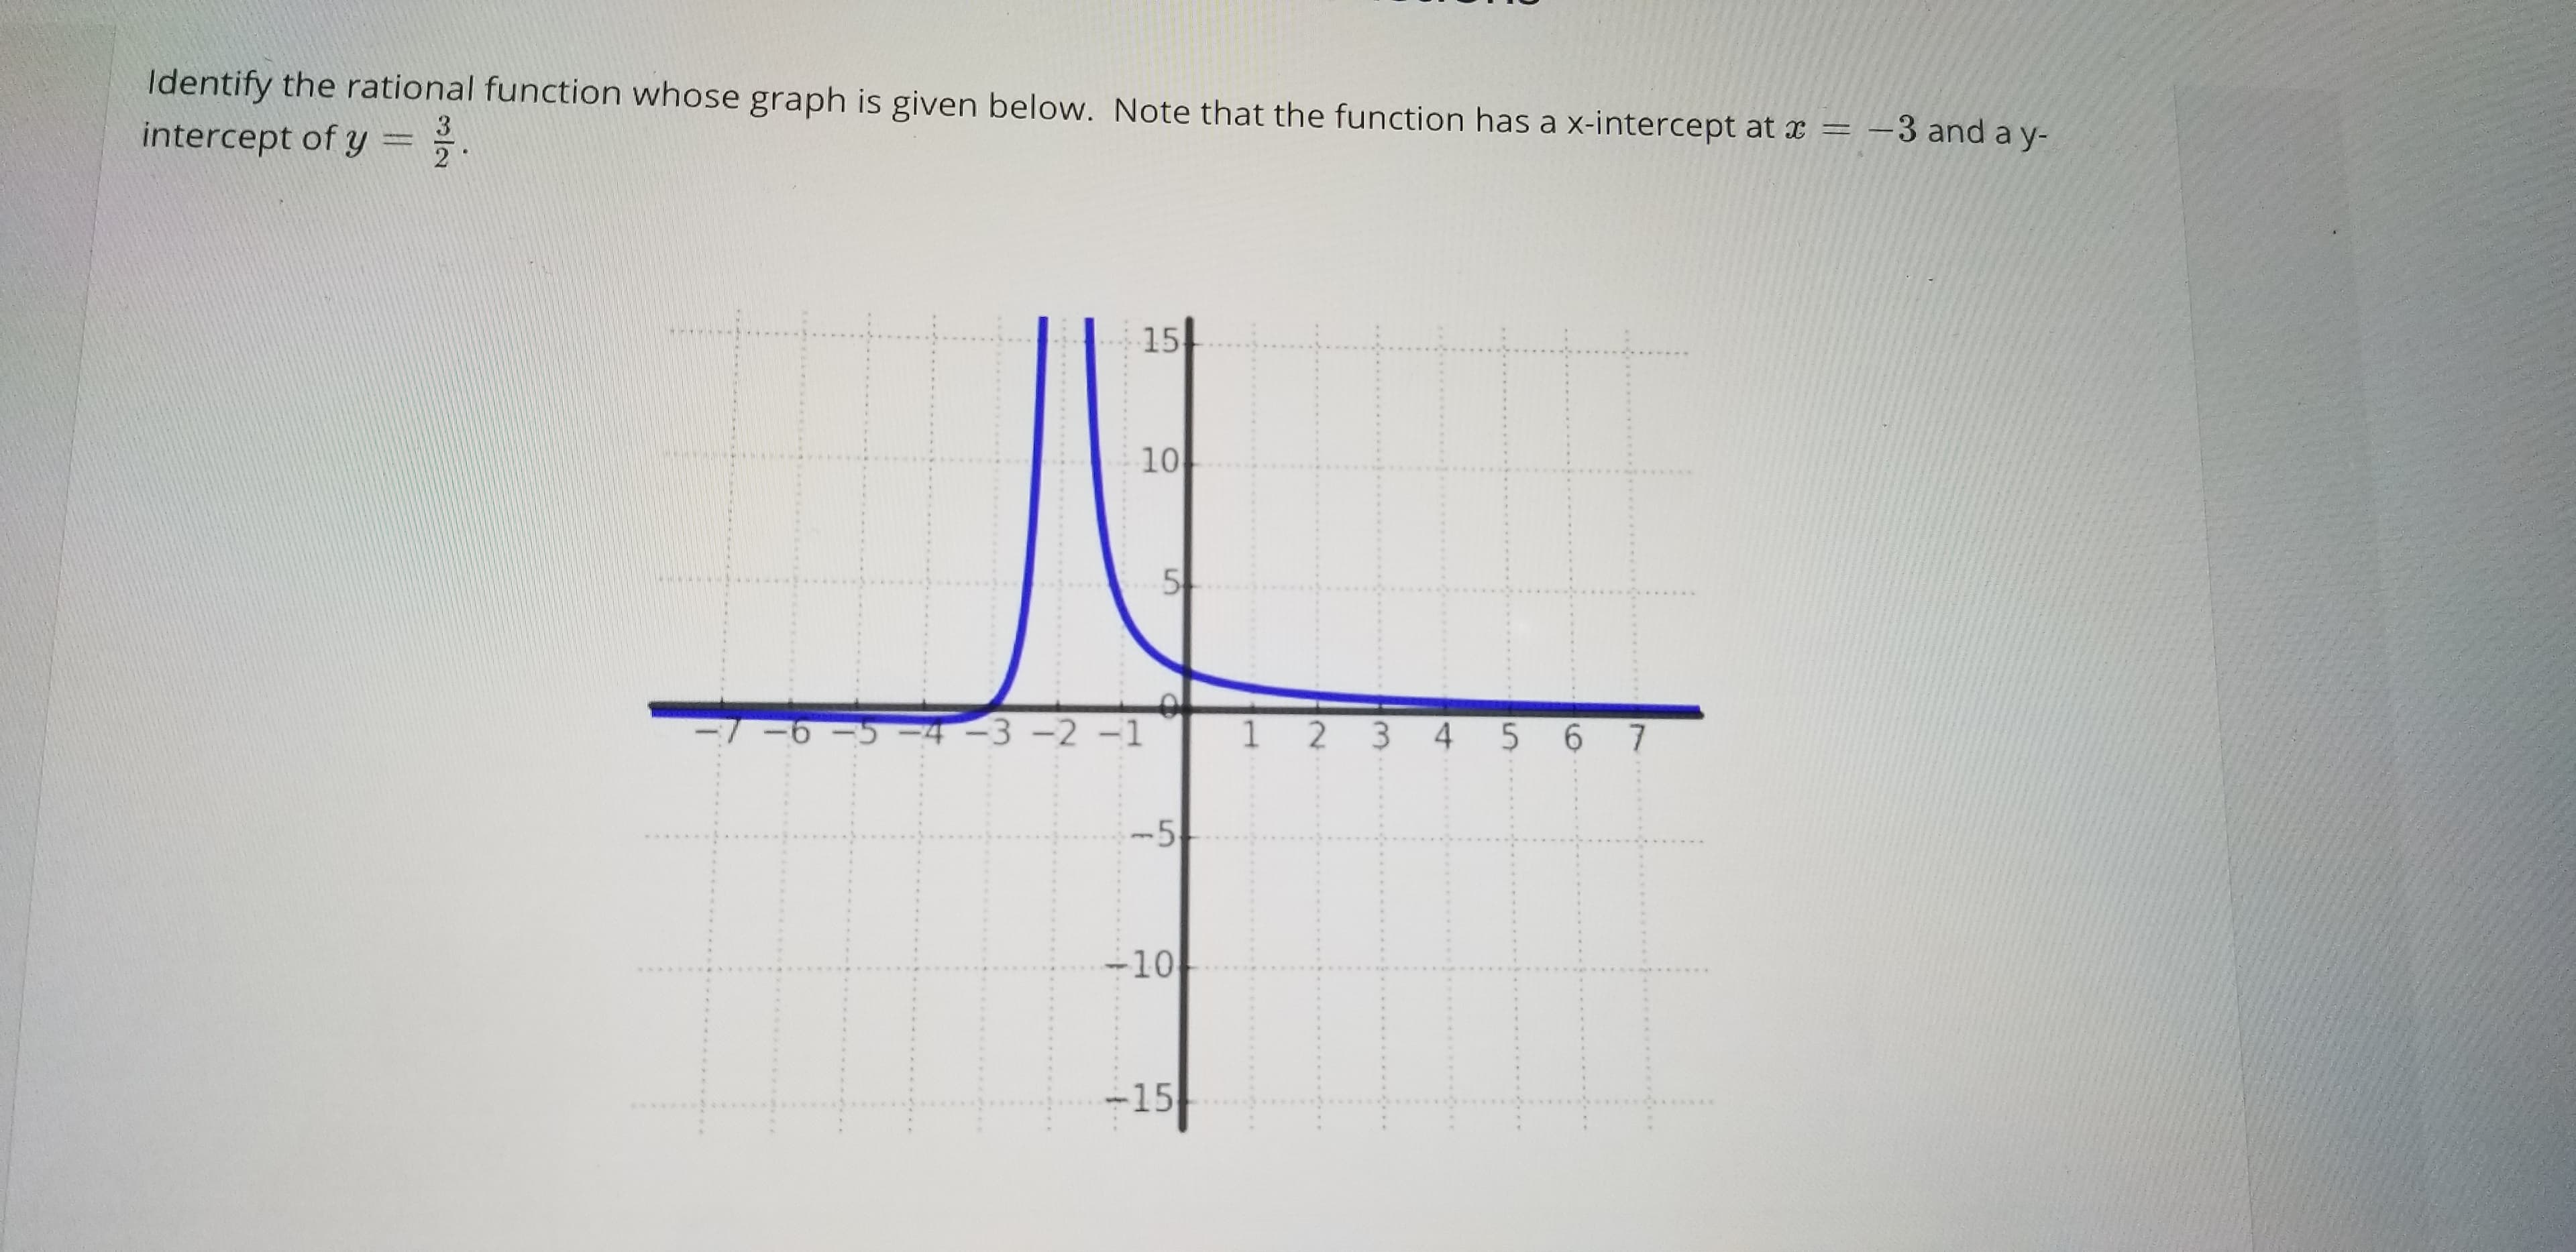 Identify the rational function whose graph is given below. Note that the function has a x-intercept at x = -3 and a y-
3
intercept of y =.
2
15
10
3-2-1
1 2 3 4 5
6-5
6 7
-5
-10
-15
